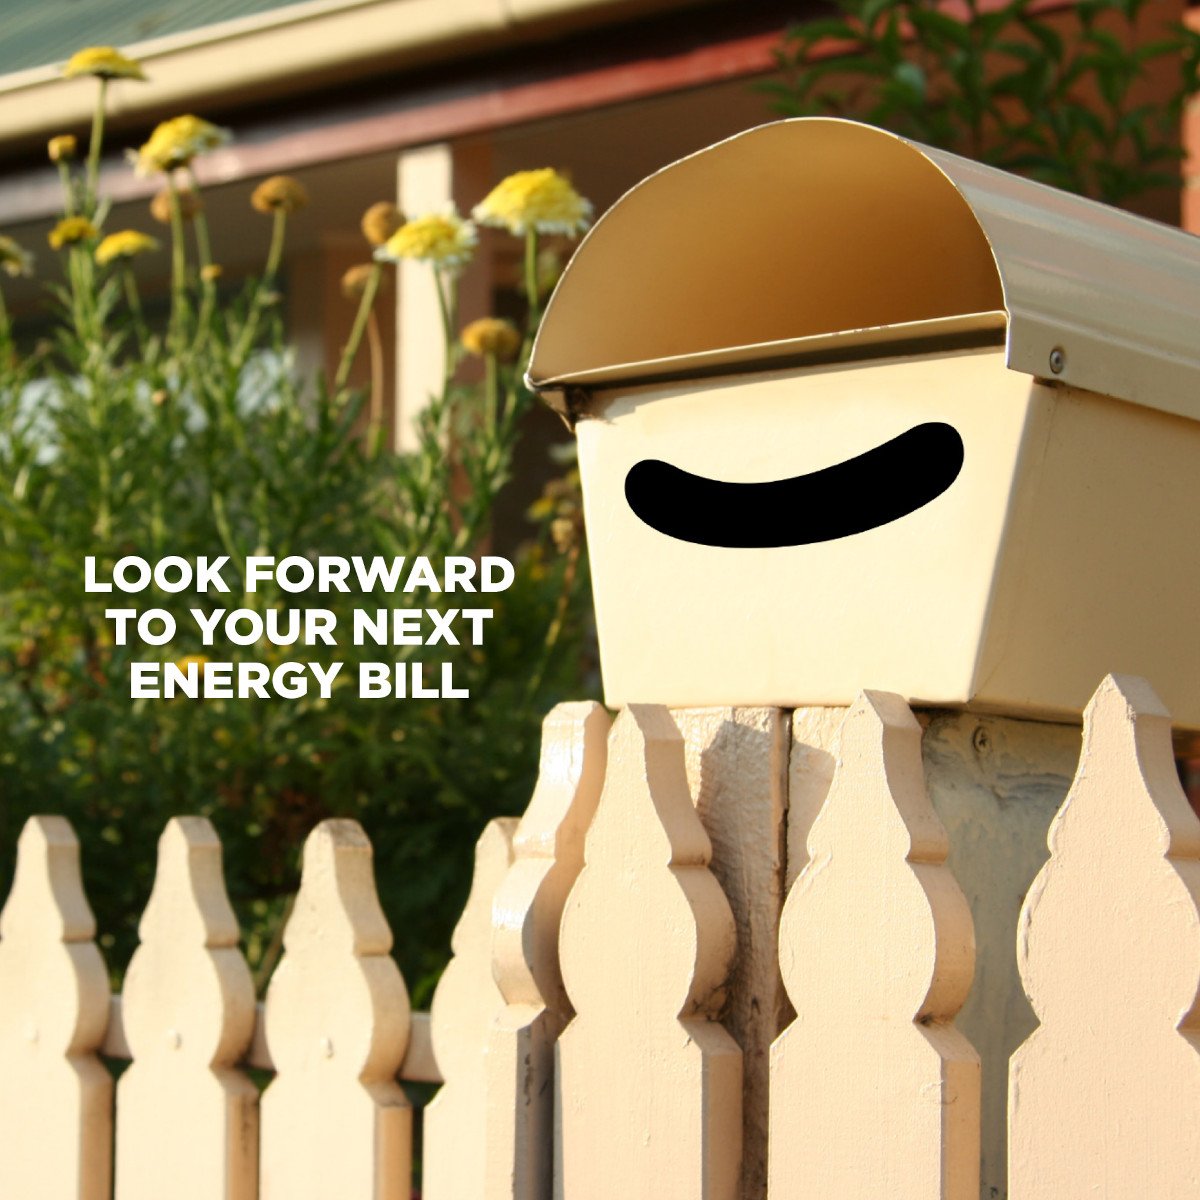 Look forward to your bill - letterbox.jpg